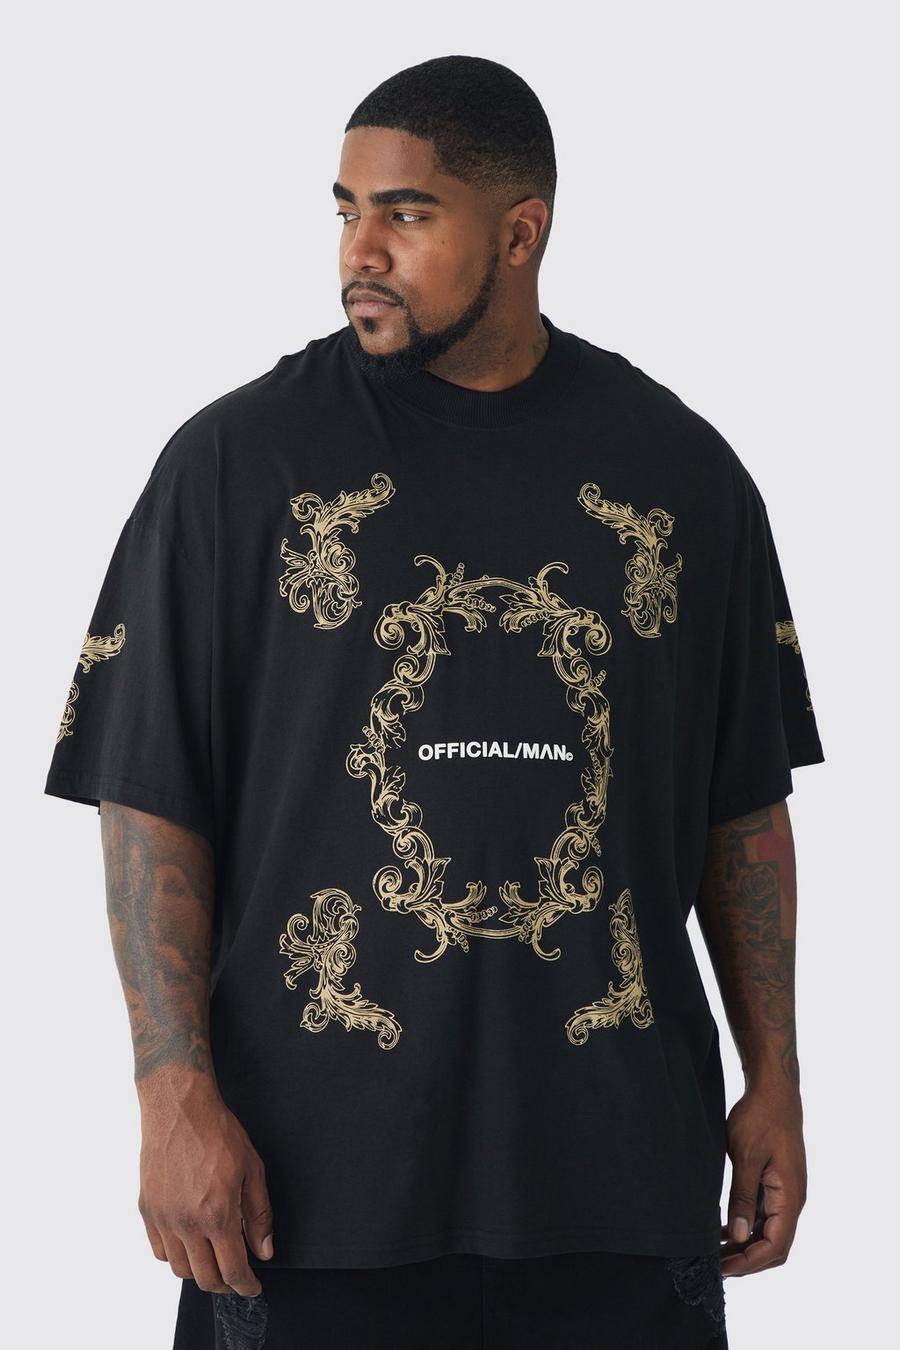 Black Plus Oversized Extended Official Man Baroque Print T-shirt